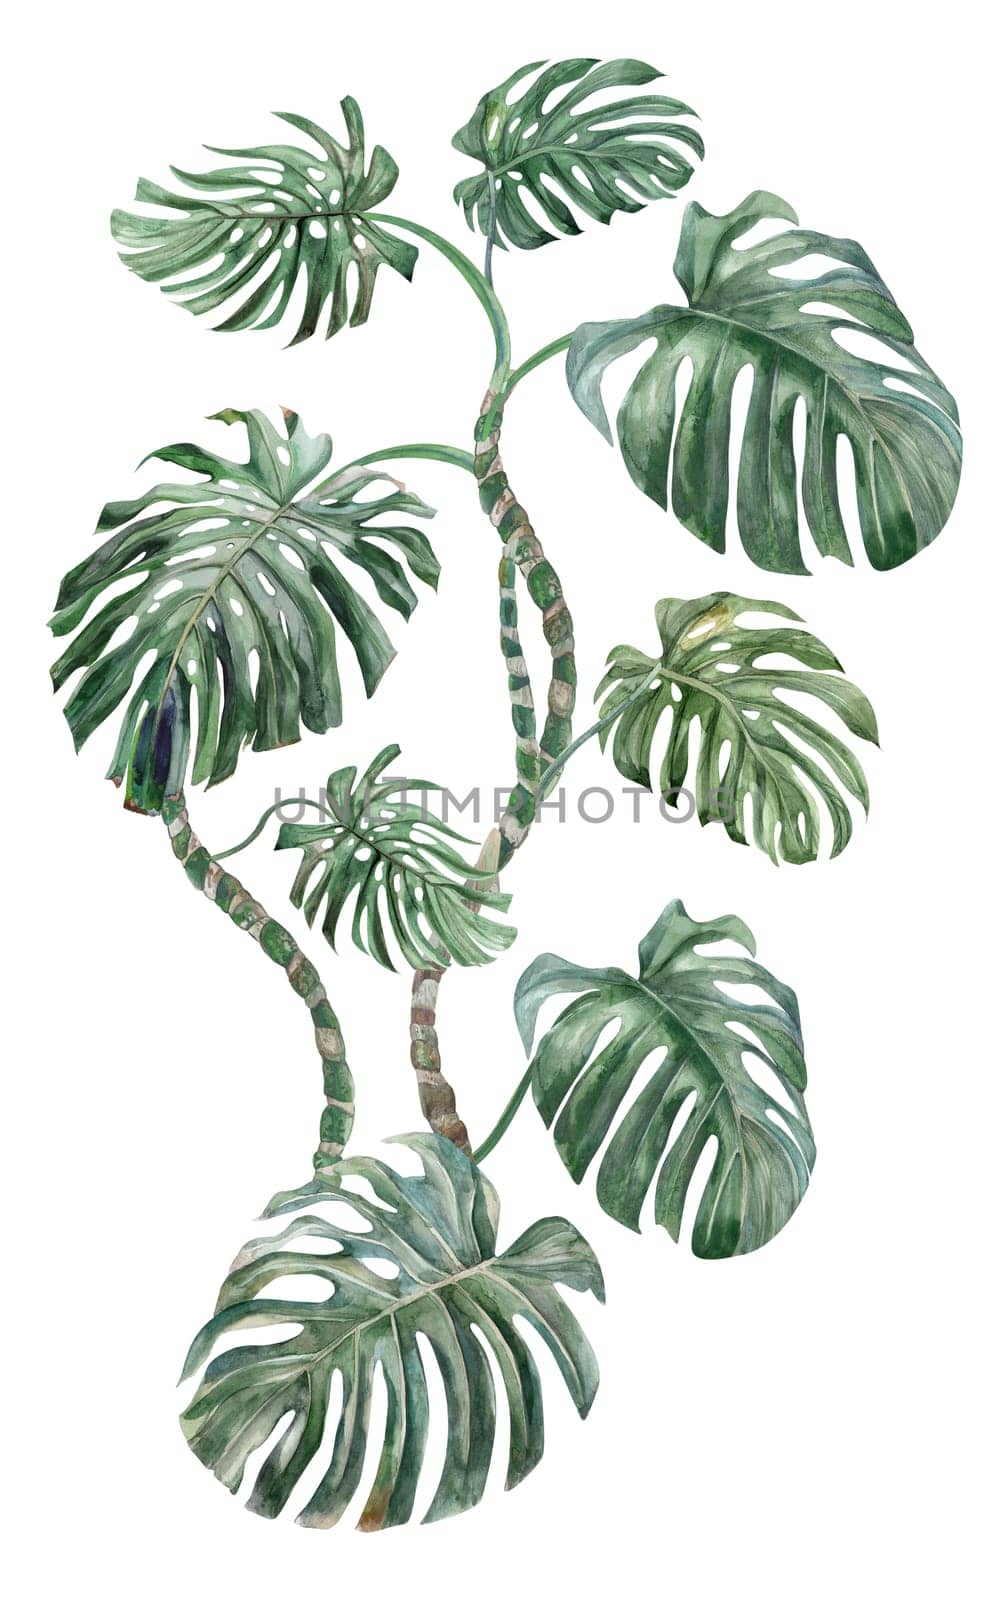 Monstera bush painted in watercolor with leaves and trunk isolated on white background